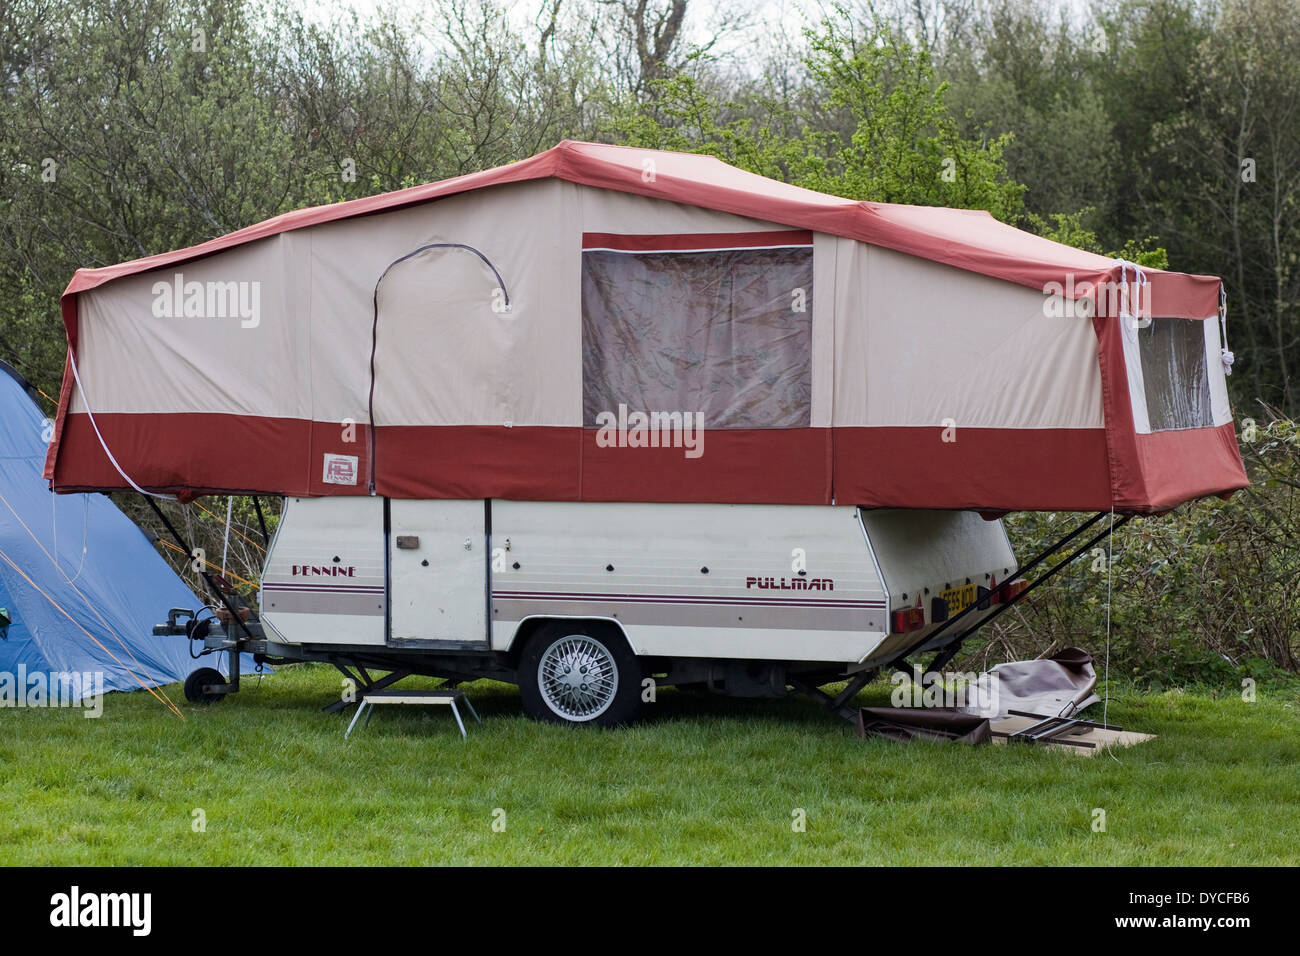 Caravan extension Tent parked at a Festival Stock Photo